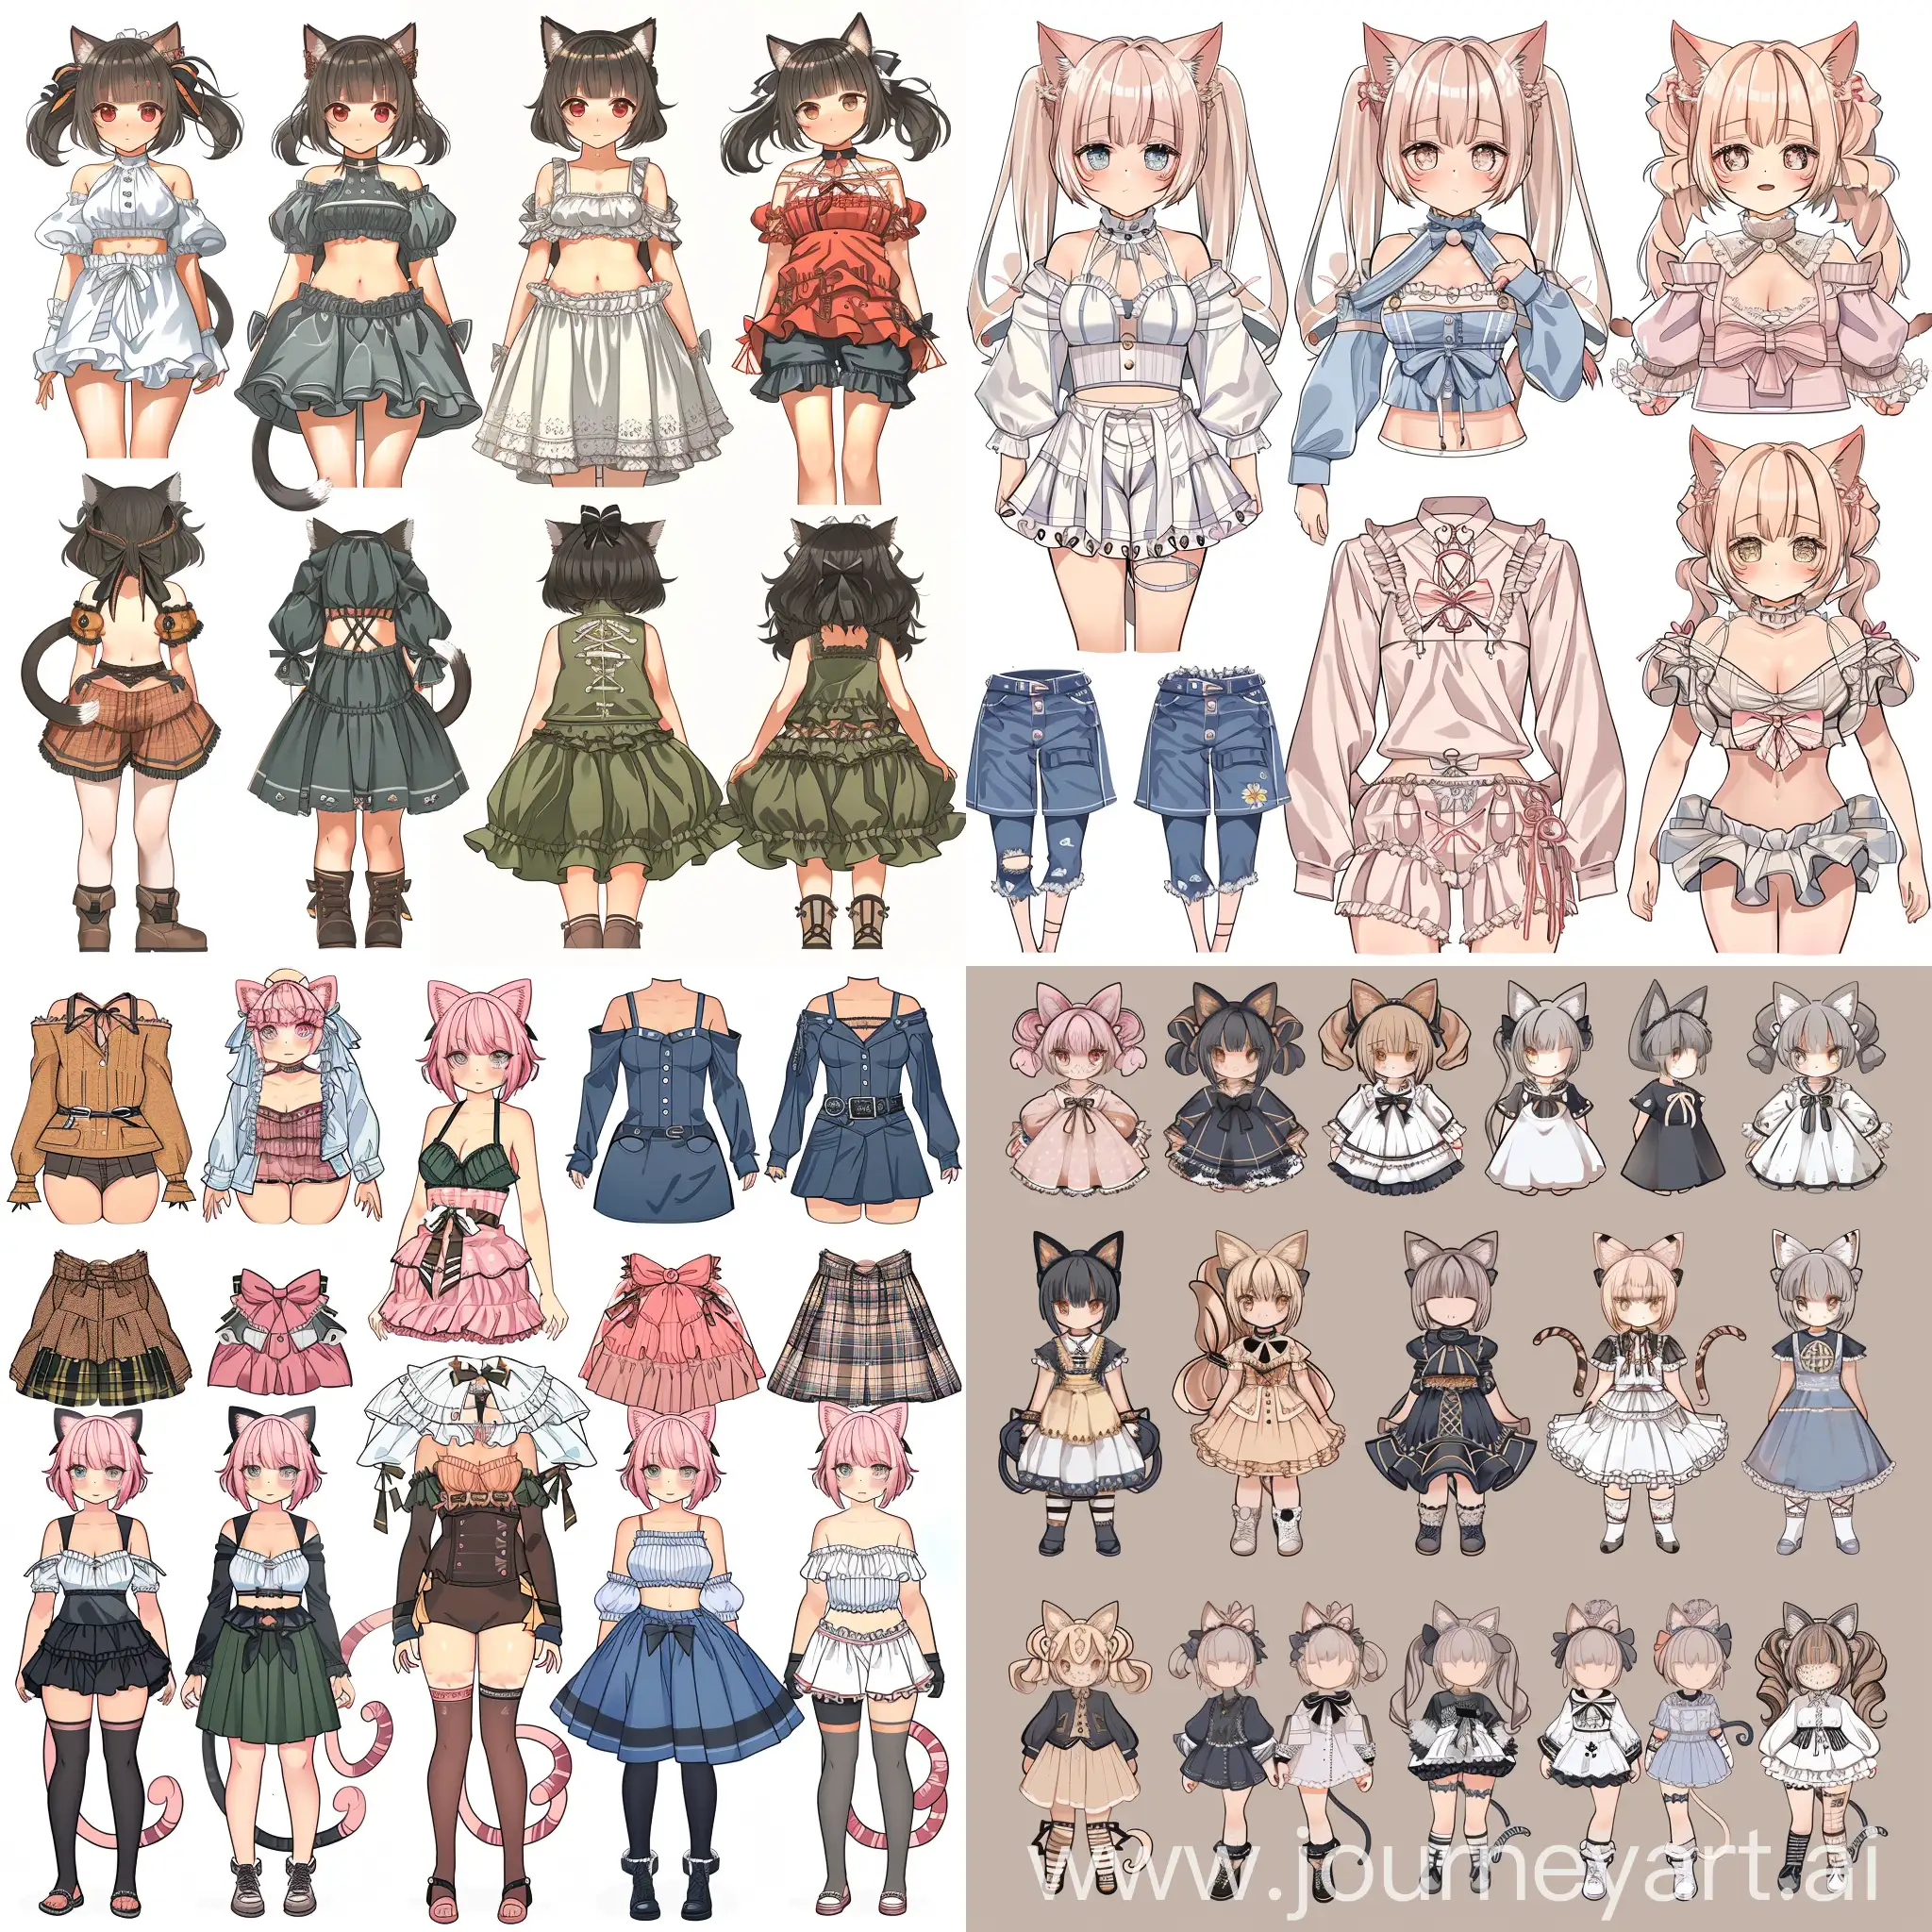 Adorable-Neko-Girl-Reference-Sheet-with-Unique-Clothing